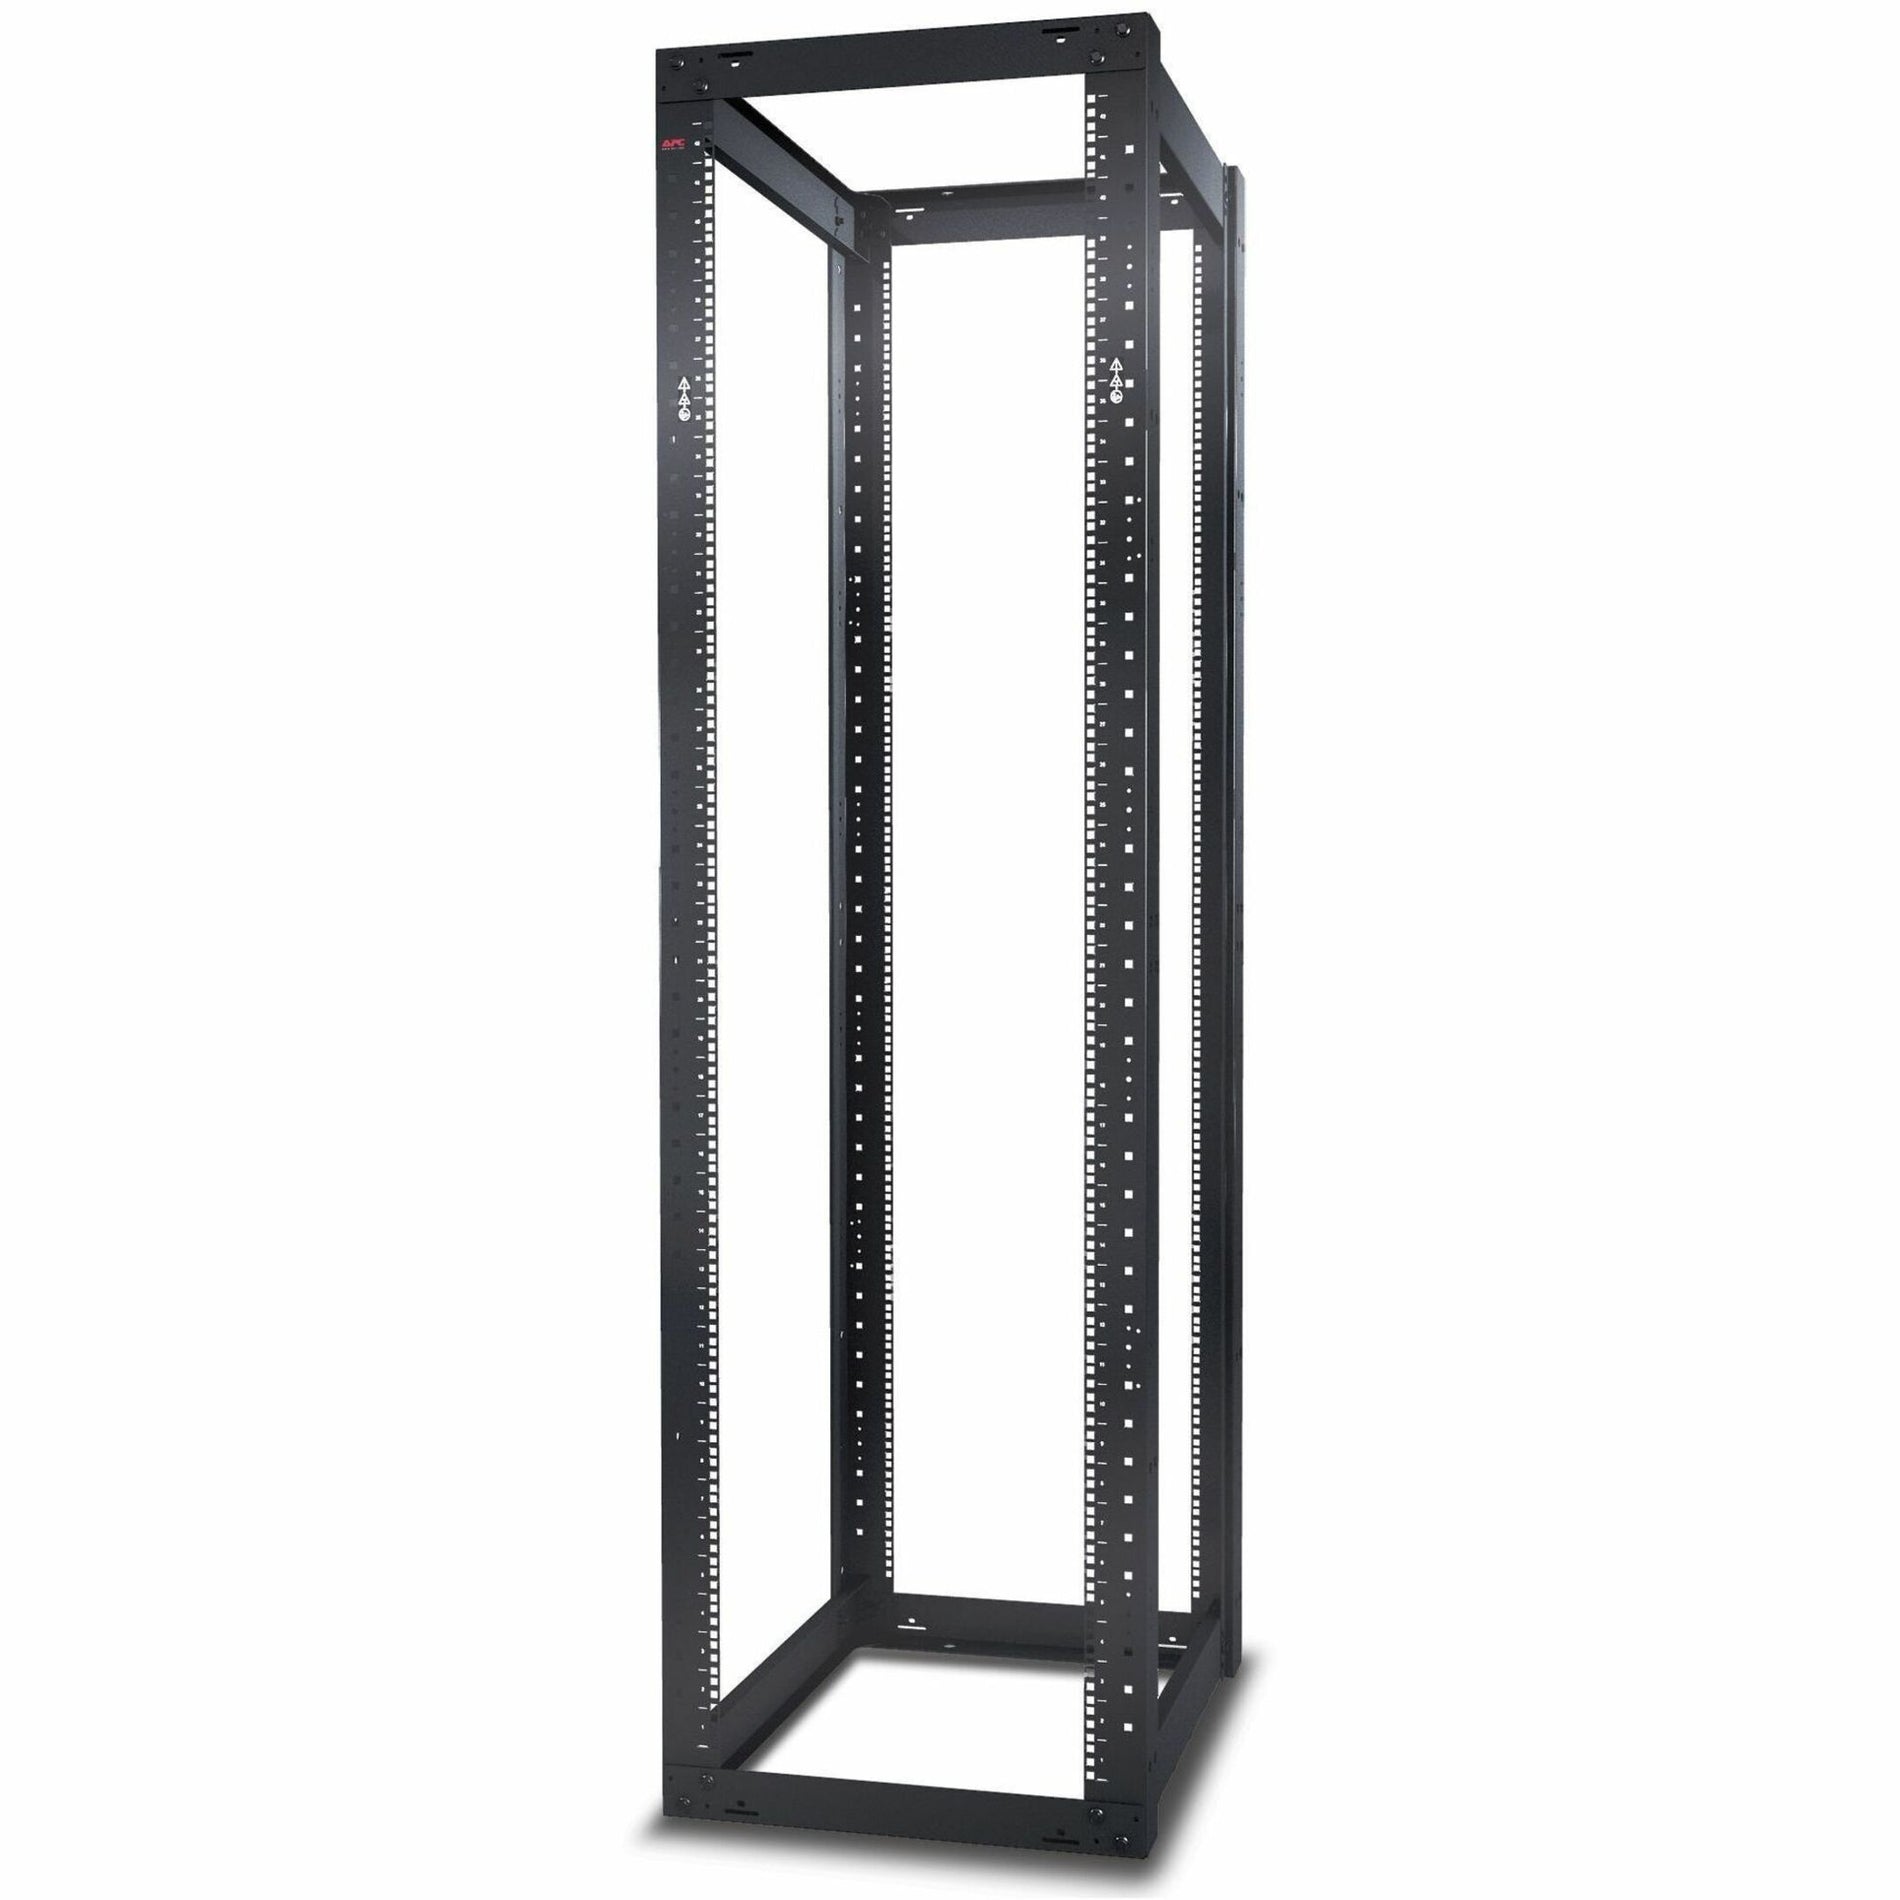 APC AR203A NetShelter 4 Post Open Frame Rack 44U Square Holes, Cable Management, Networking